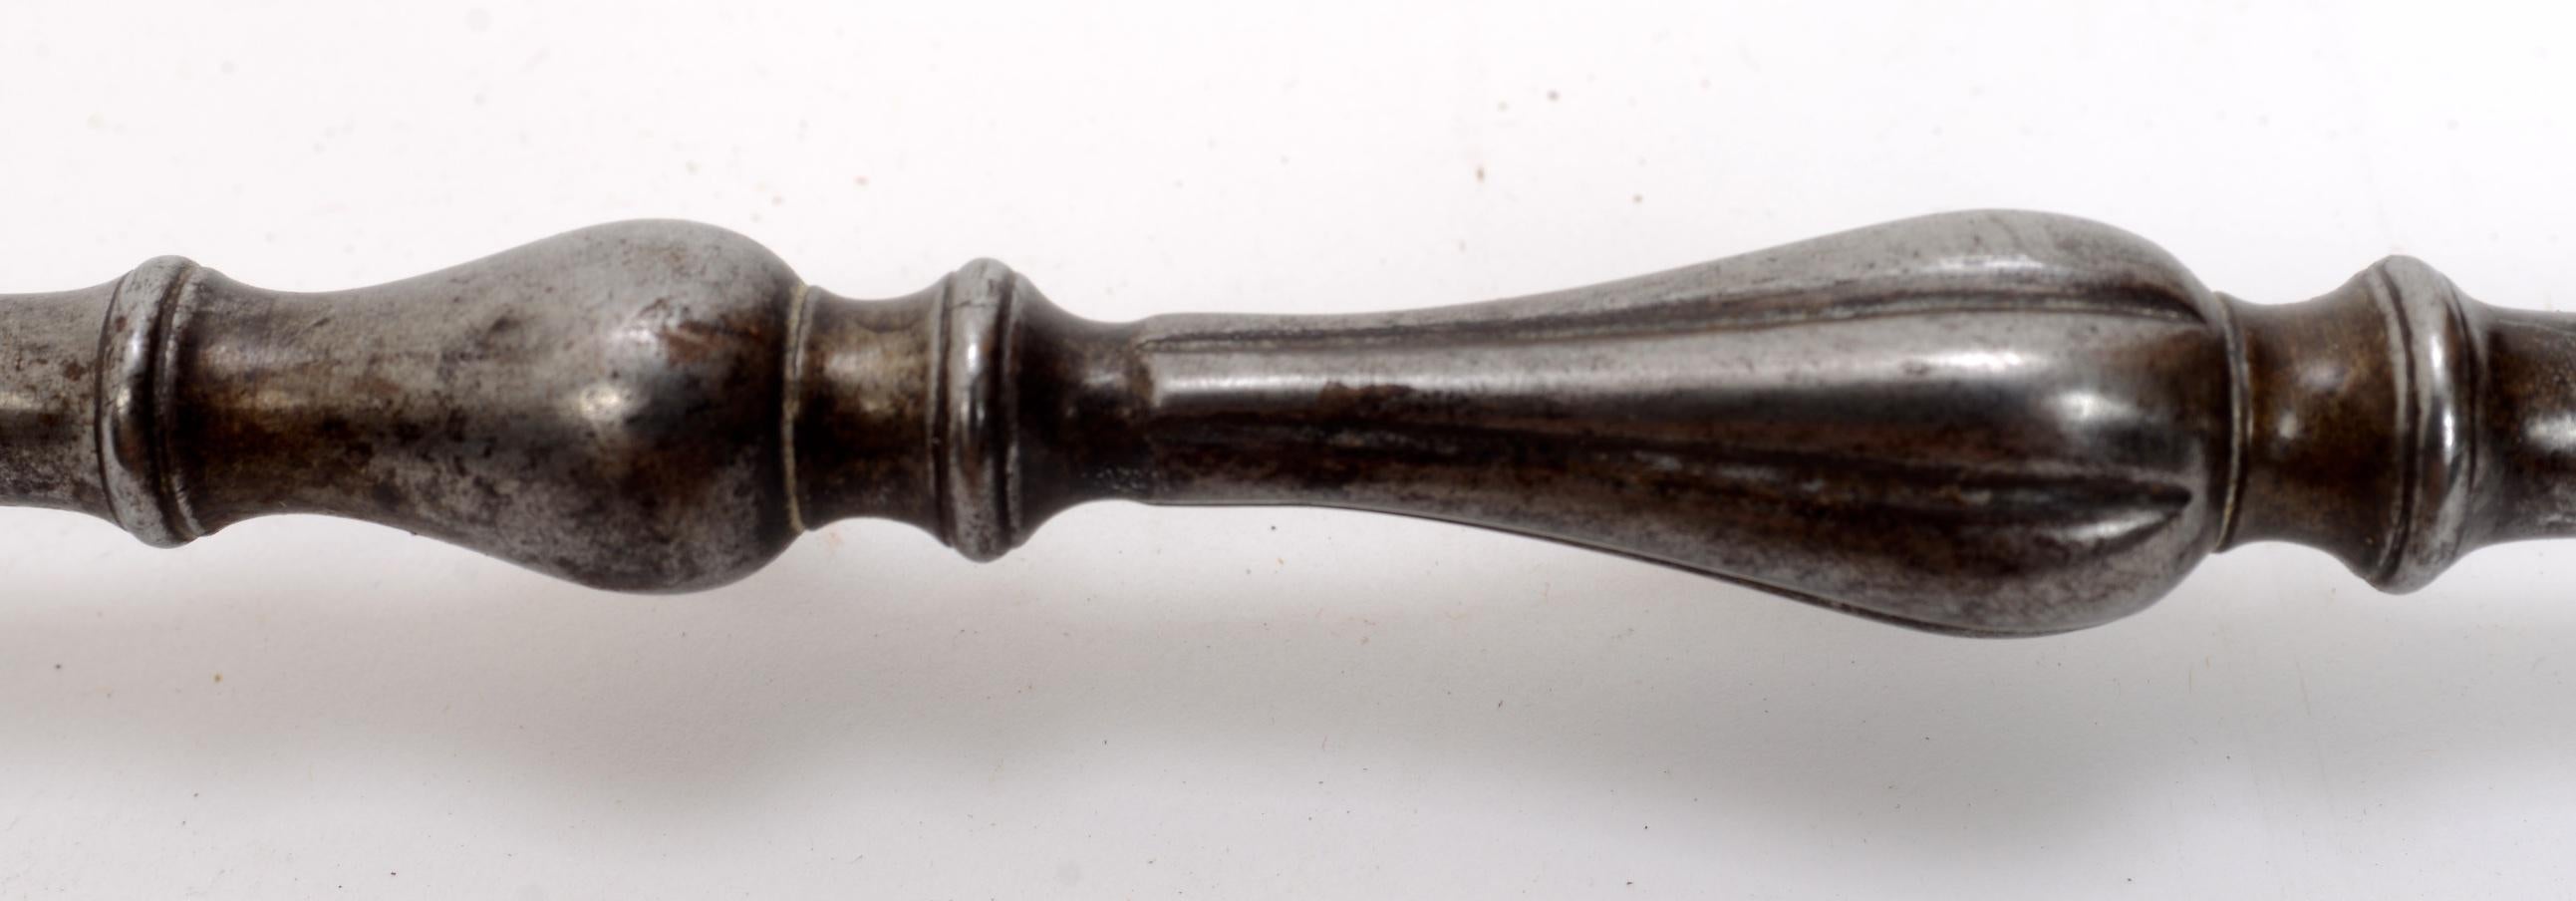 Fireplace Tools, Polished Steel, Late 18th-Early 19th Century For Sale 3